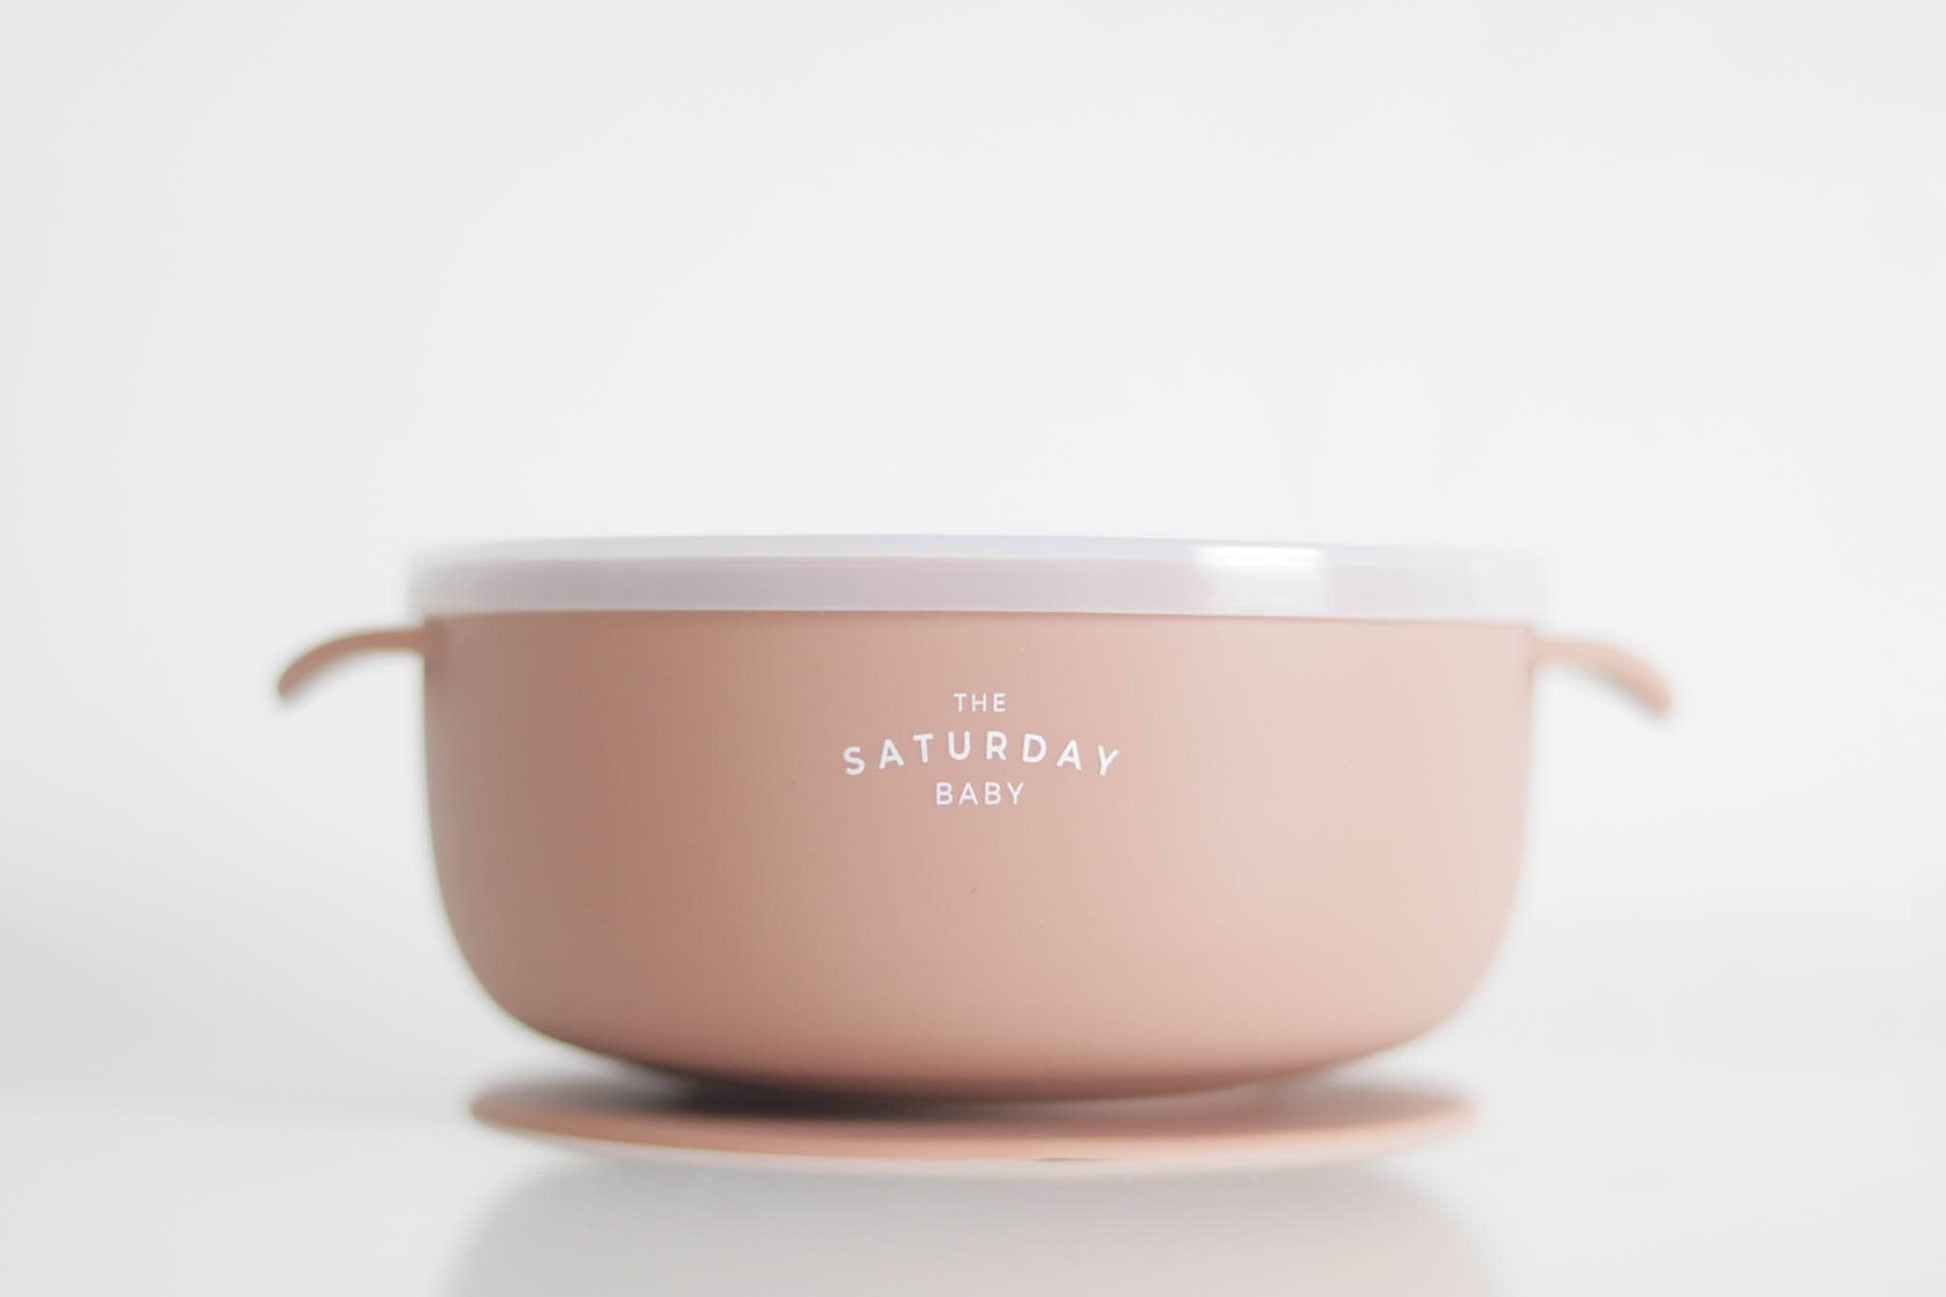 The Saturday Baby - Suction Bowl With Lid (7426903736498)